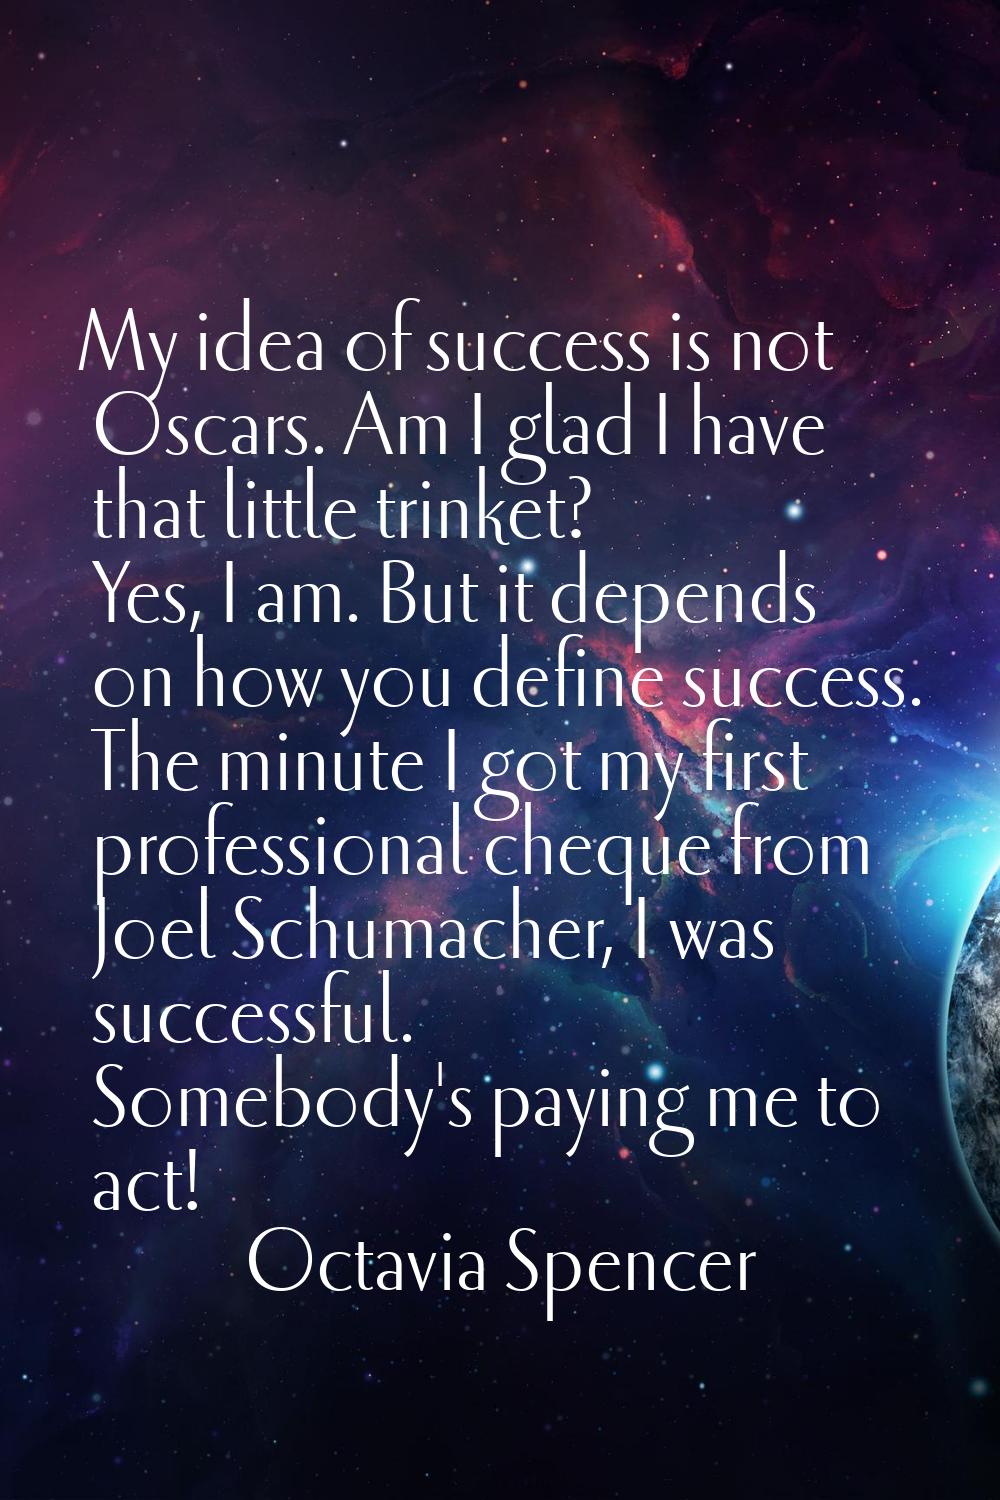 My idea of success is not Oscars. Am I glad I have that little trinket? Yes, I am. But it depends o